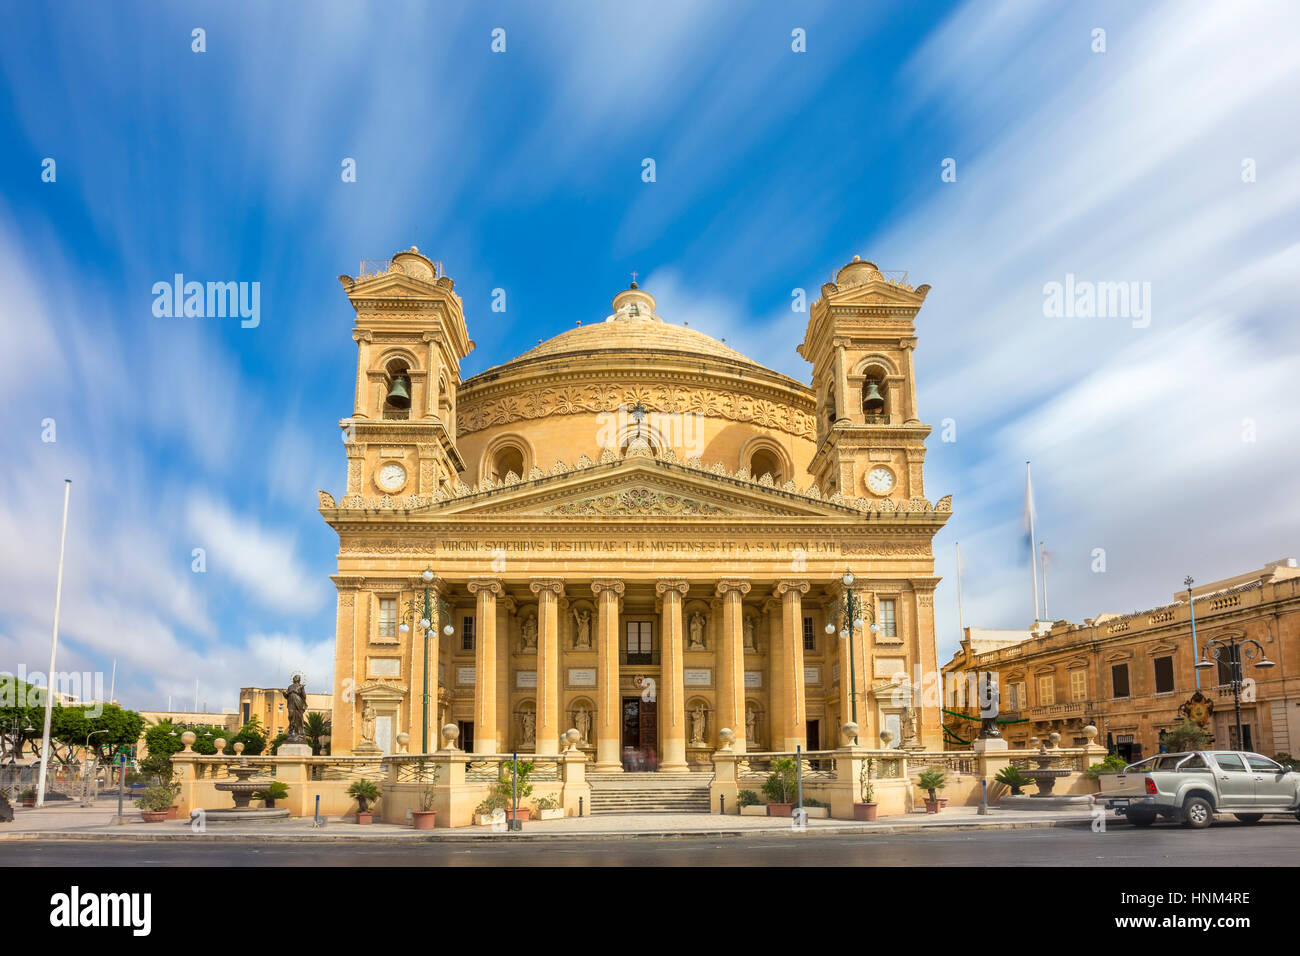 Mosta, Malta - The Church of Assumption of our Lady also know as Mosta Dome at daylight with moving clouds Stock Photo